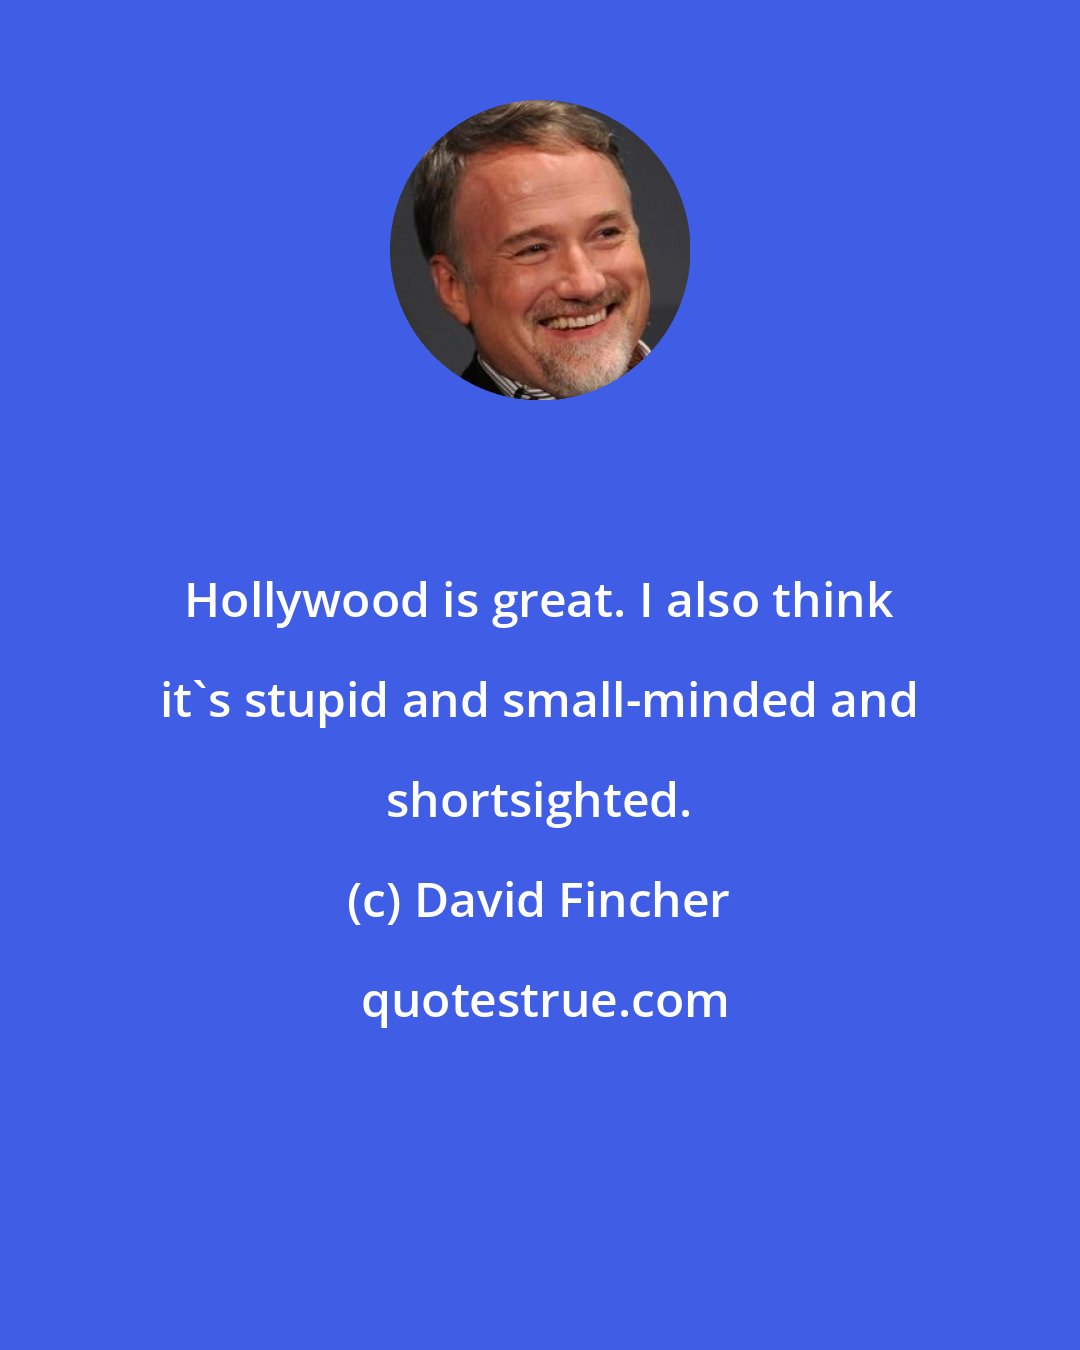 David Fincher: Hollywood is great. I also think it's stupid and small-minded and shortsighted.